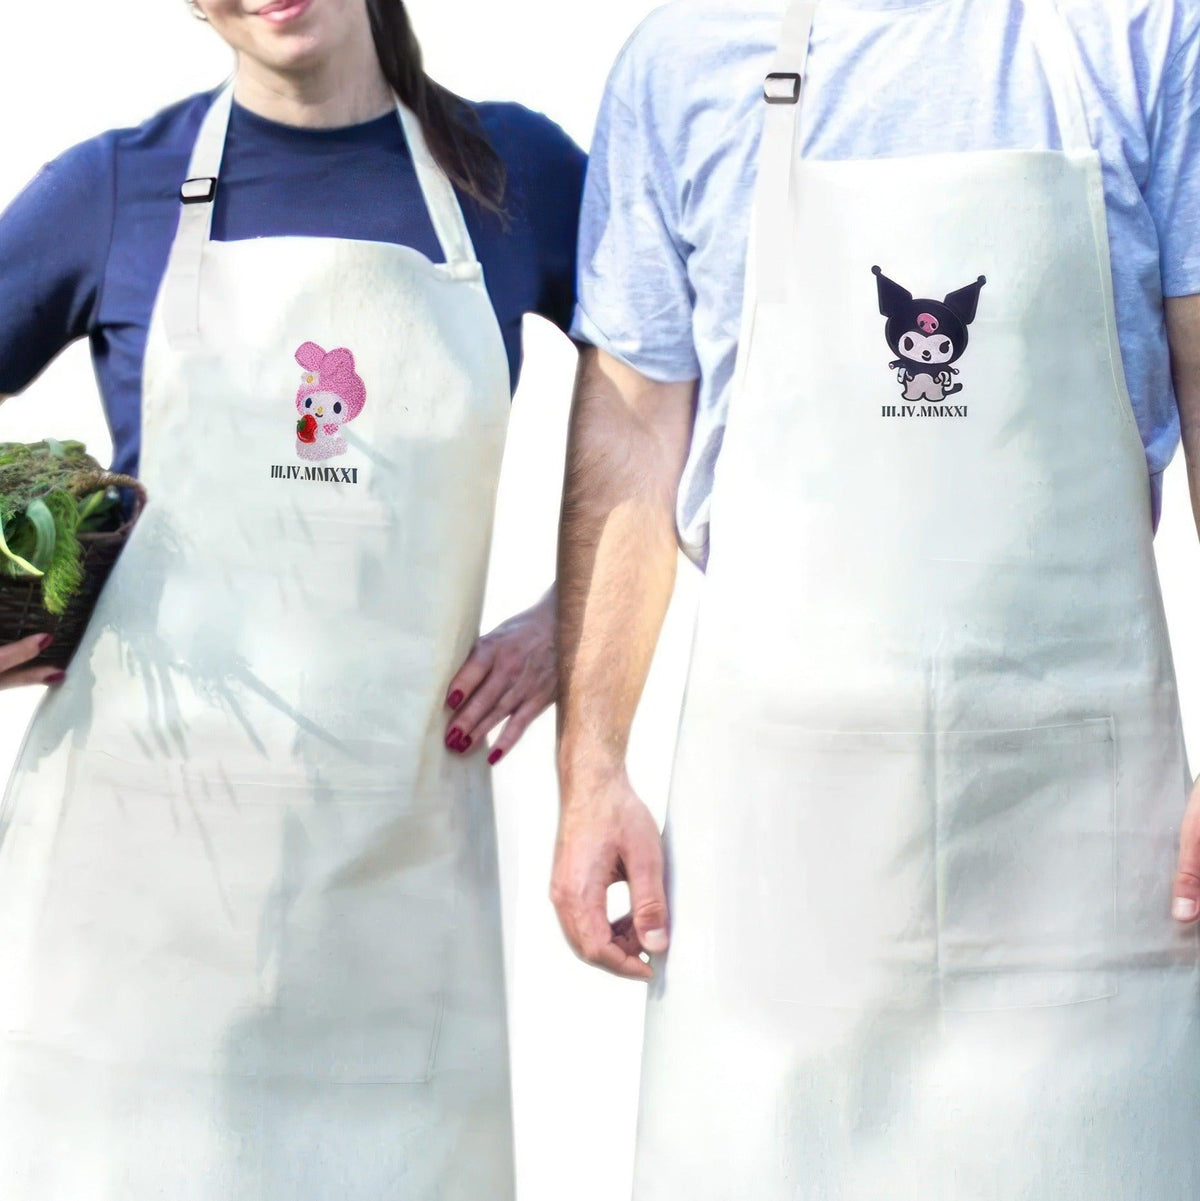 Custom Embroidered Aprons For Couples, Matching Couples Aprons, Bunny Couples Cartoon Character Embroidered Aprons